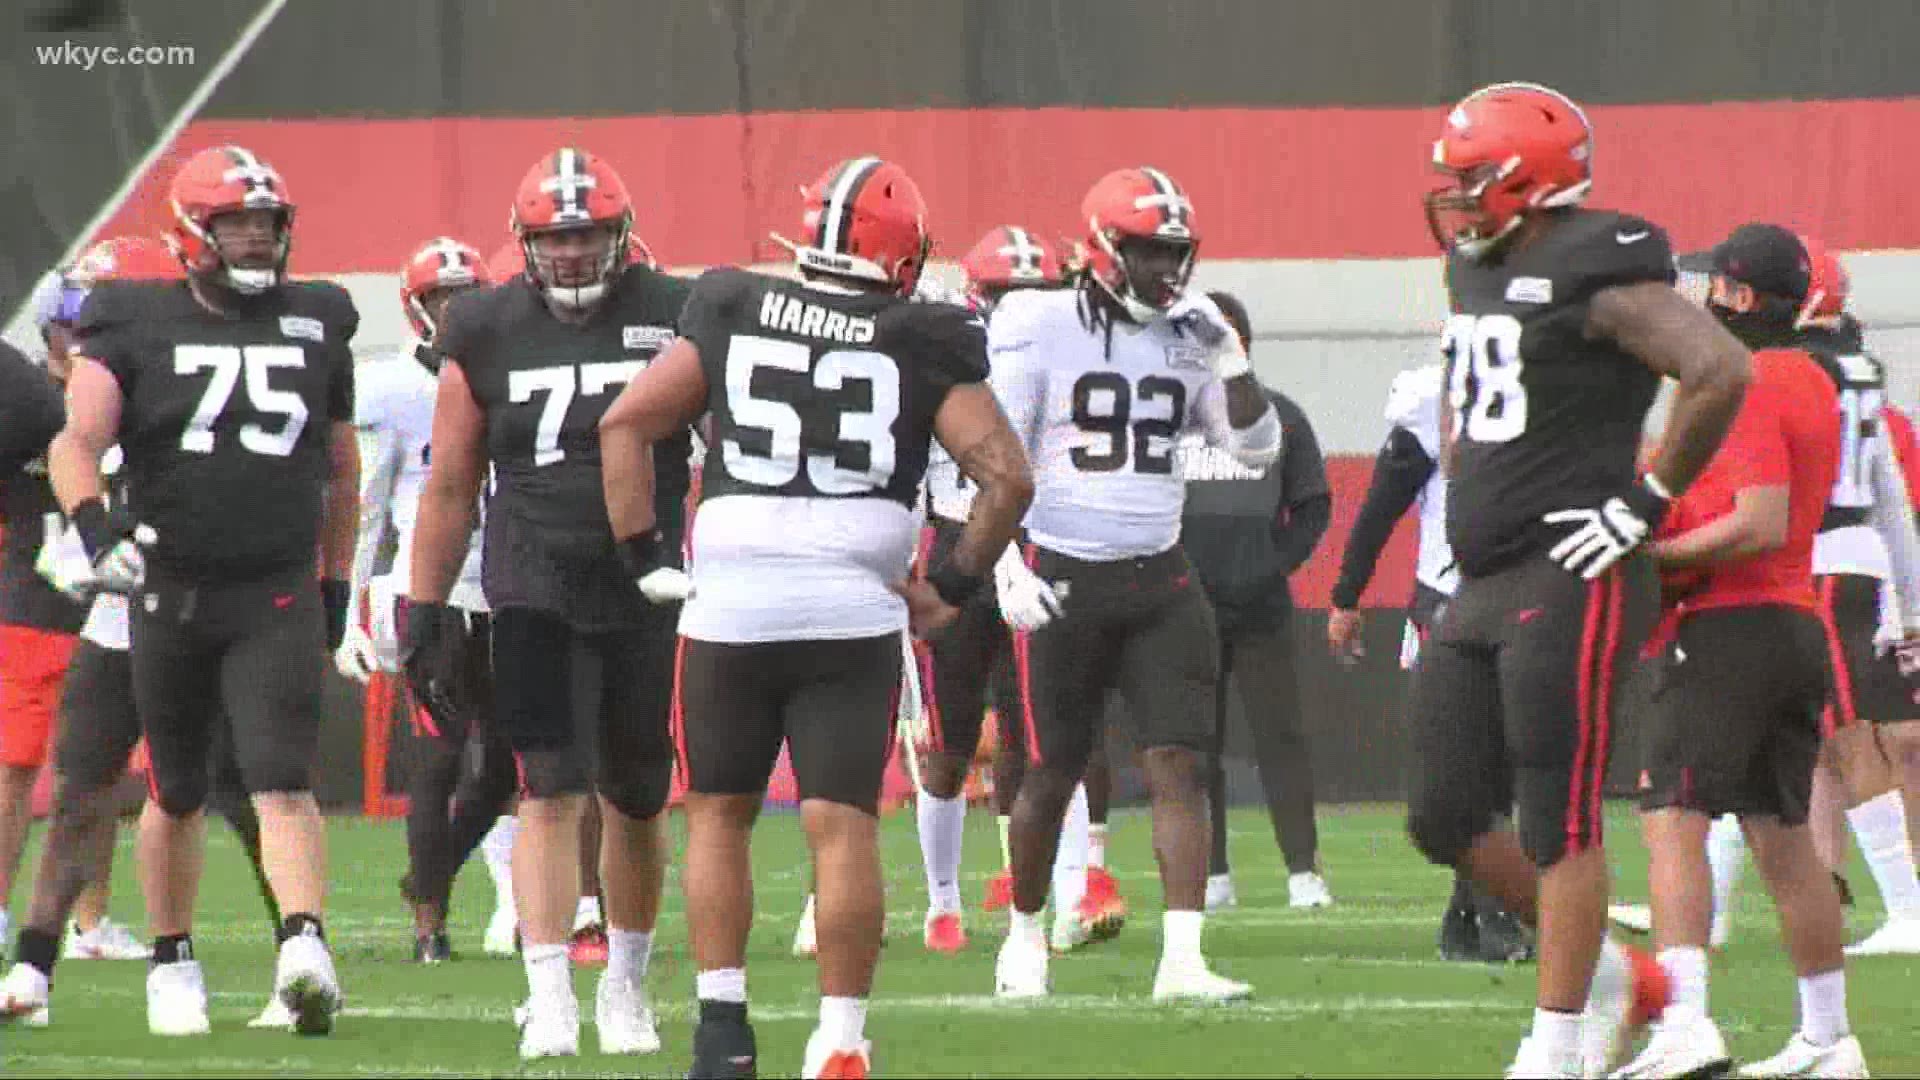 Chubb is being evaluated for a concussion. The Browns practiced in pads on Monday for the first time in training camp.